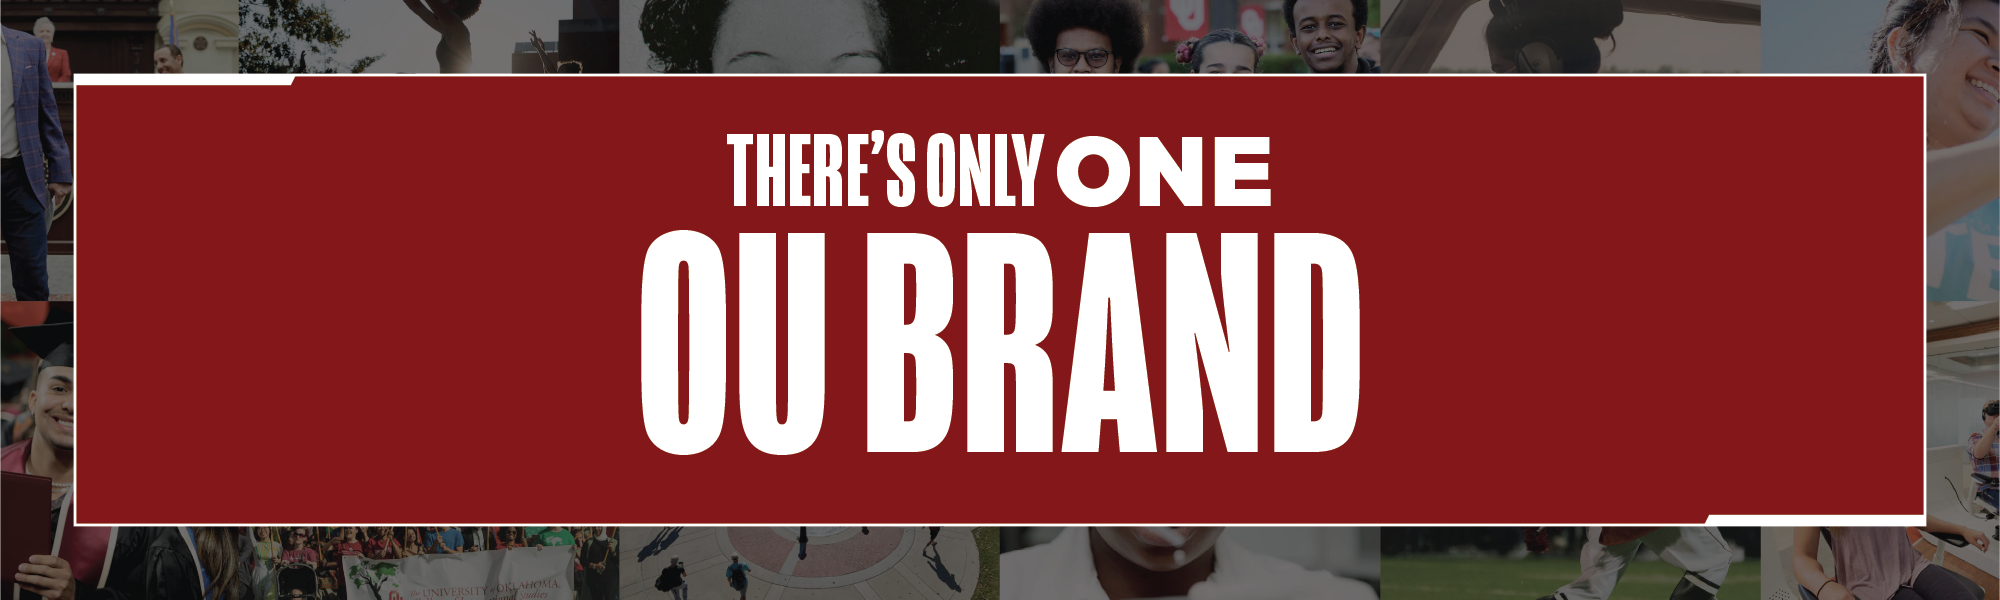 There's Only One OU Brand